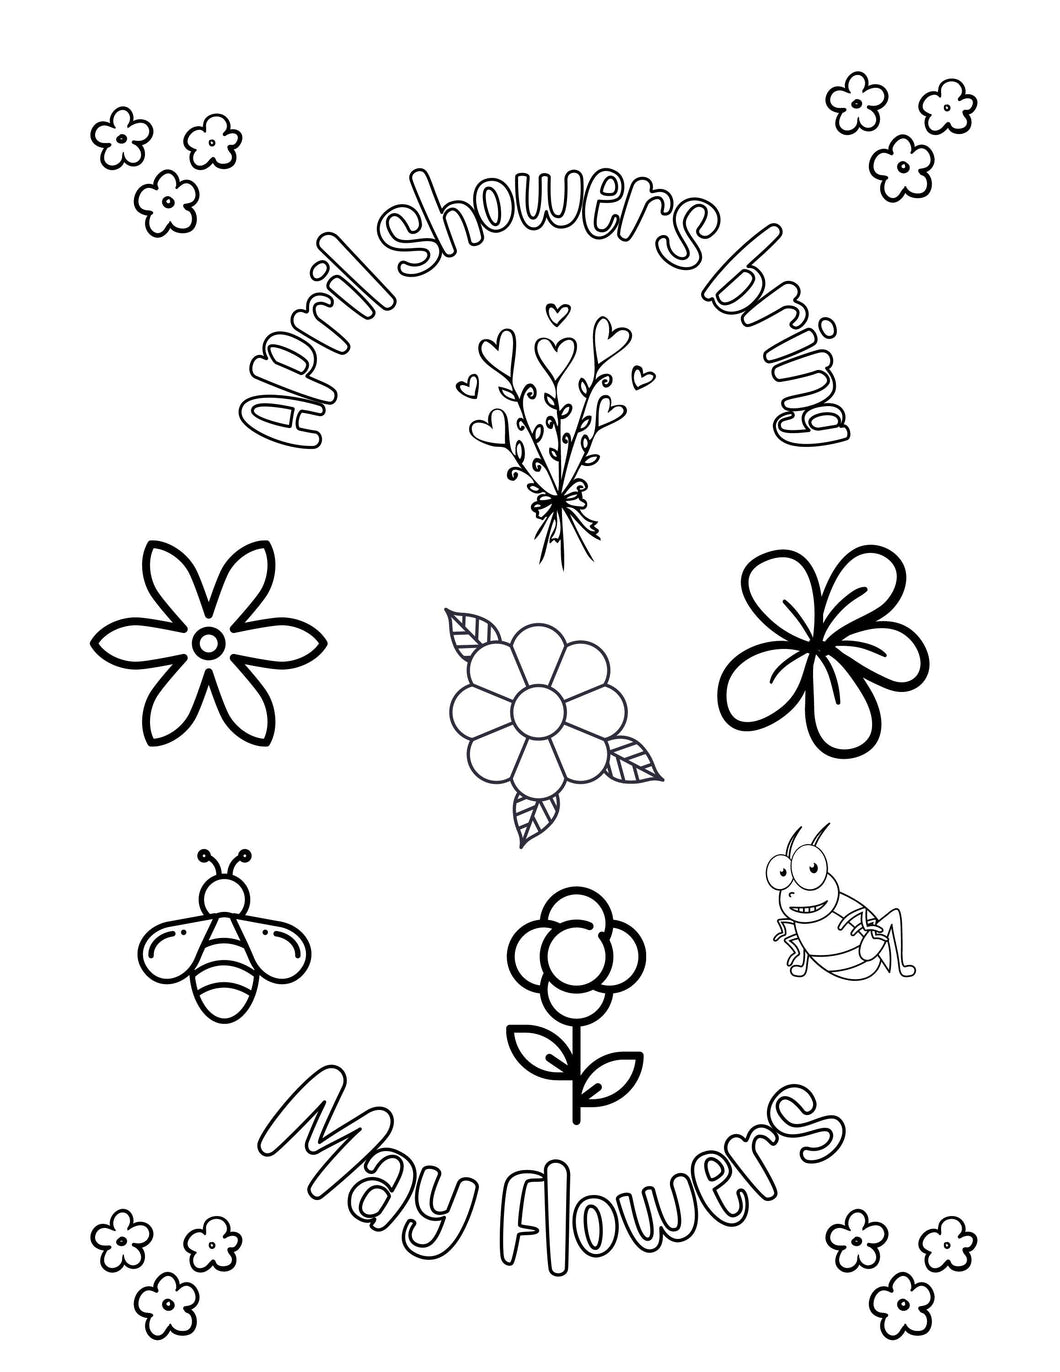 April Showers Bring May Flowers Coloring Sheet